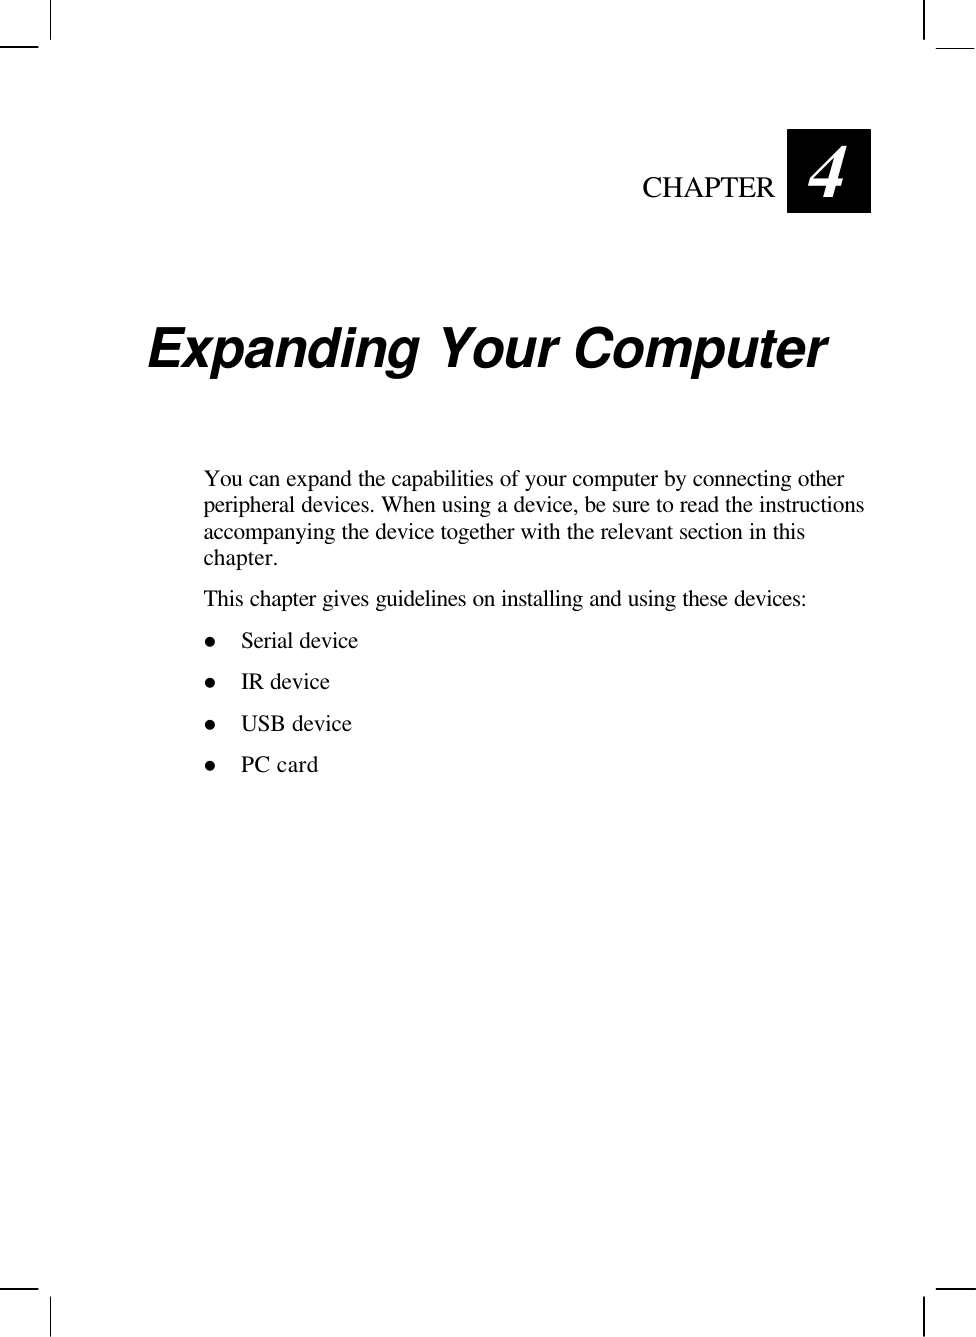   CHAPTER 4 Expanding Your Computer You can expand the capabilities of your computer by connecting other peripheral devices. When using a device, be sure to read the instructions accompanying the device together with the relevant section in this chapter. This chapter gives guidelines on installing and using these devices: l Serial device l IR device l USB device l PC card  